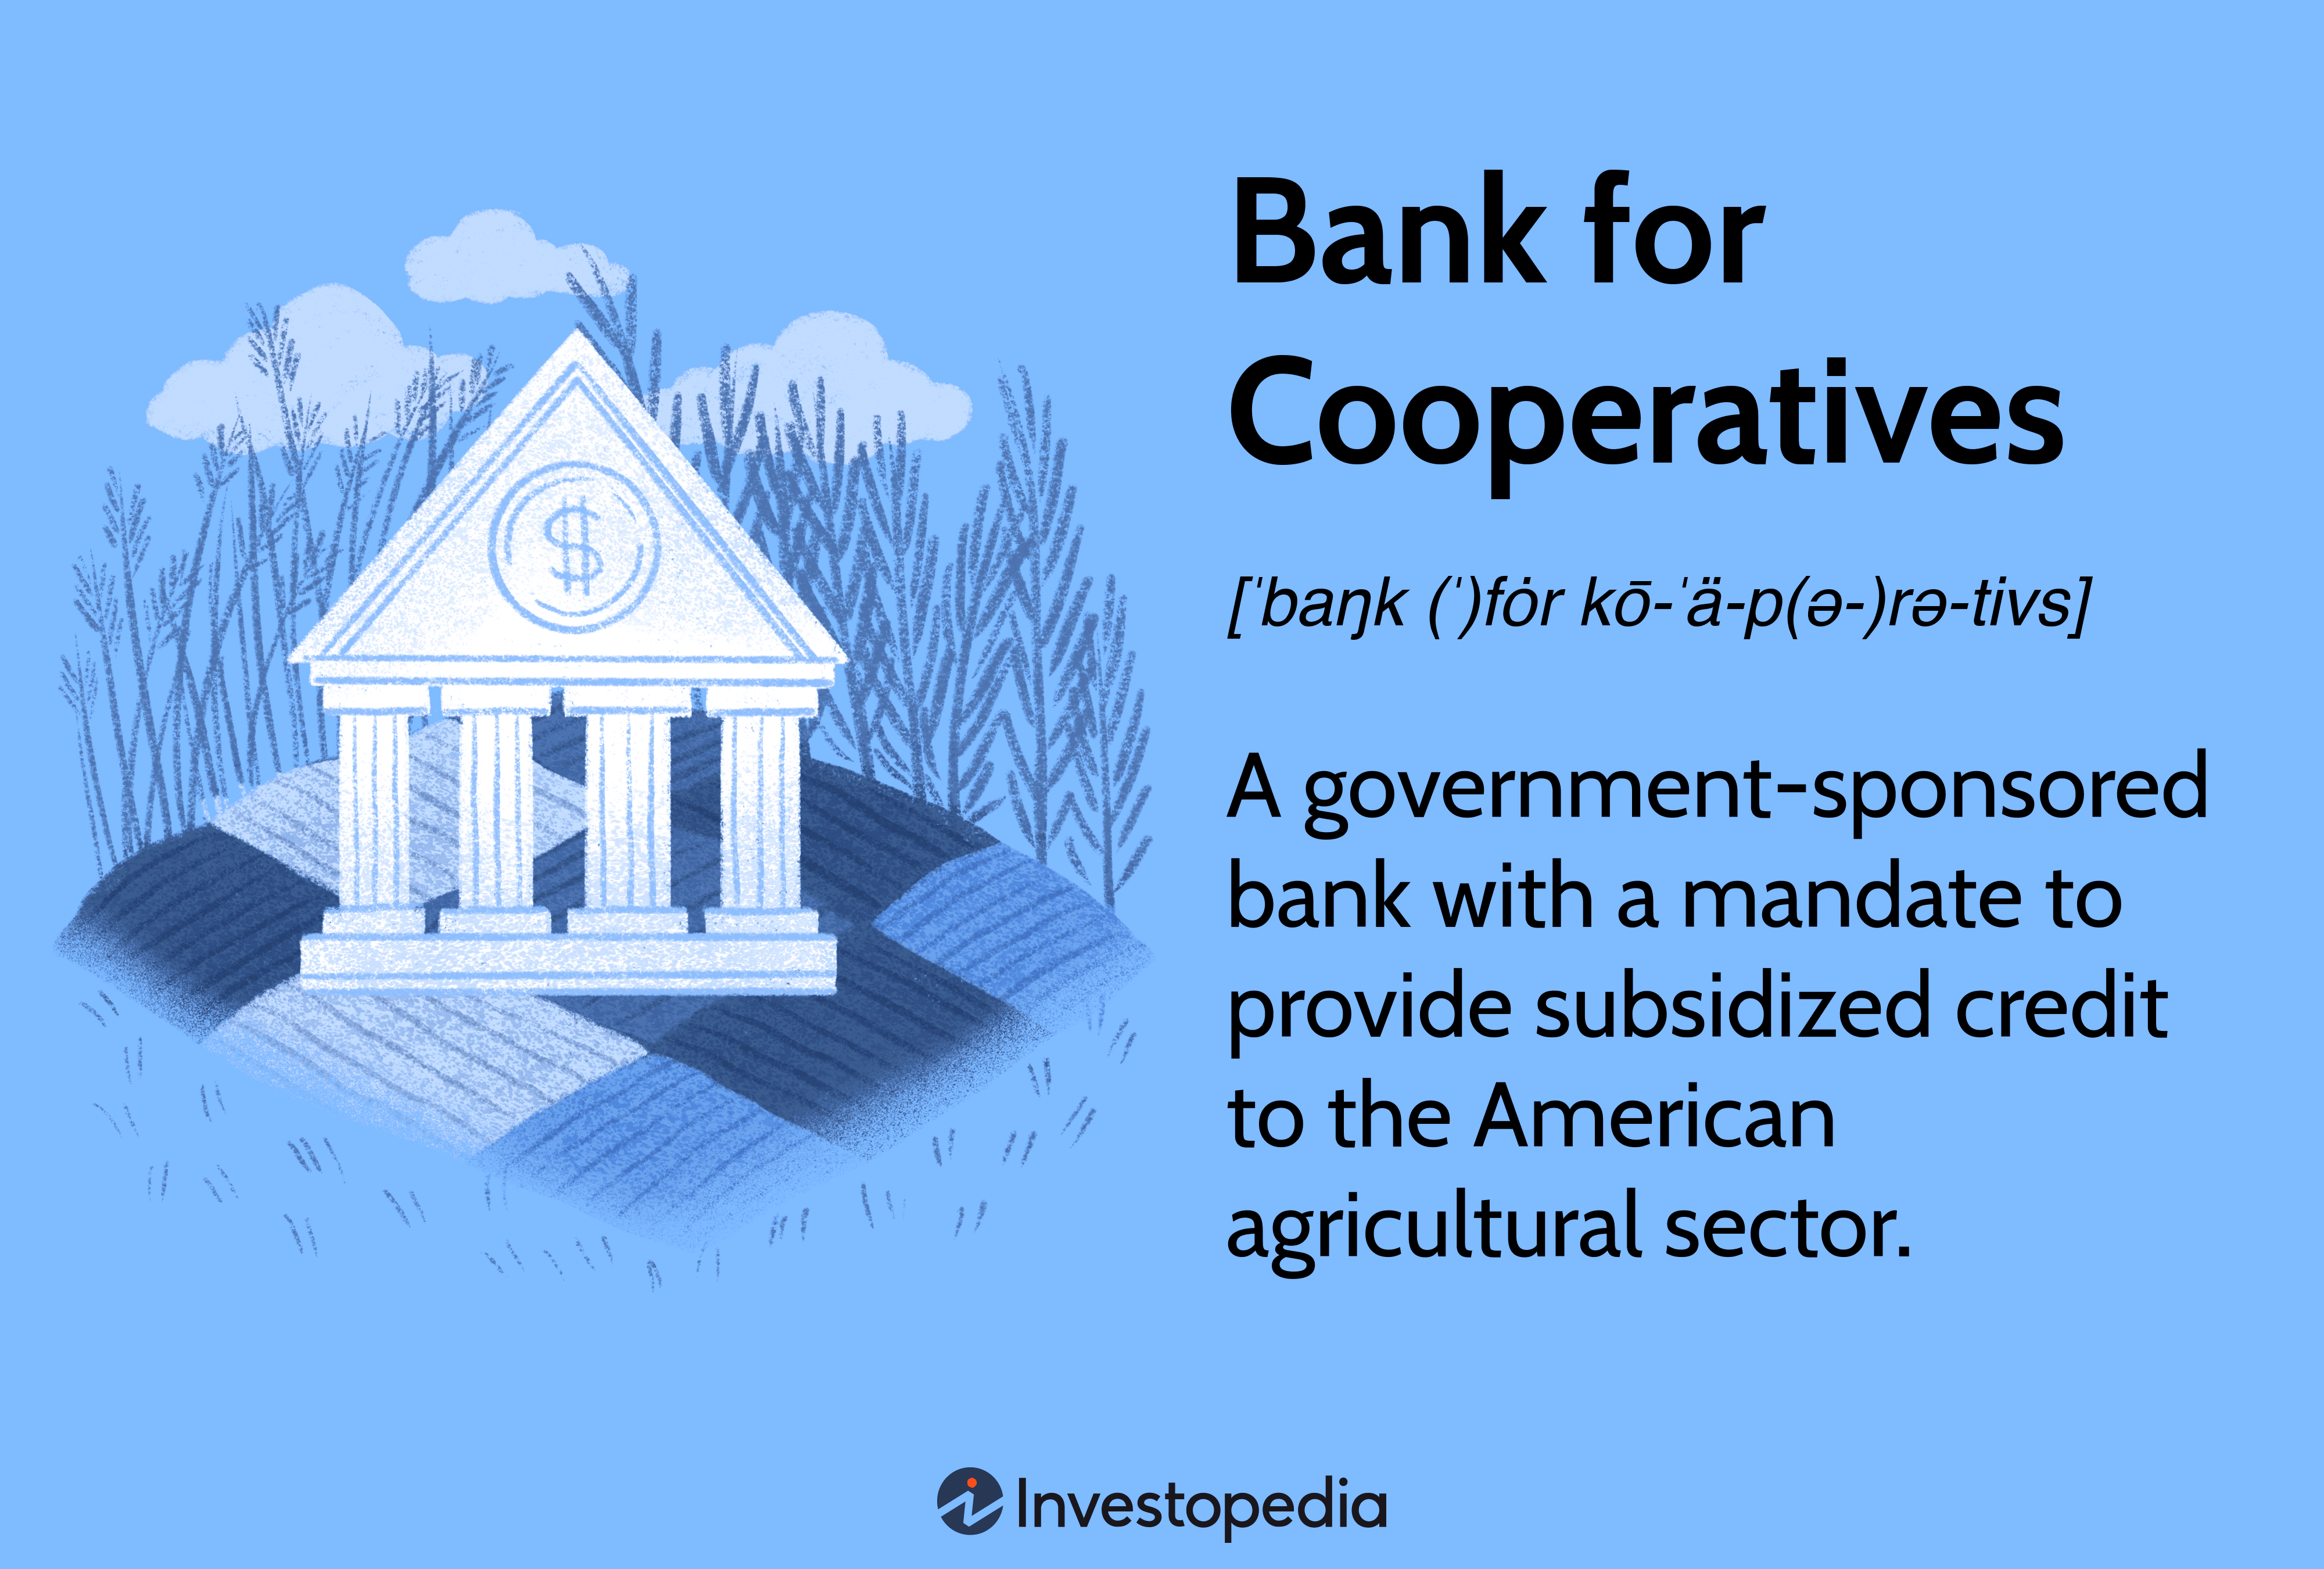 Bank for Cooperatives